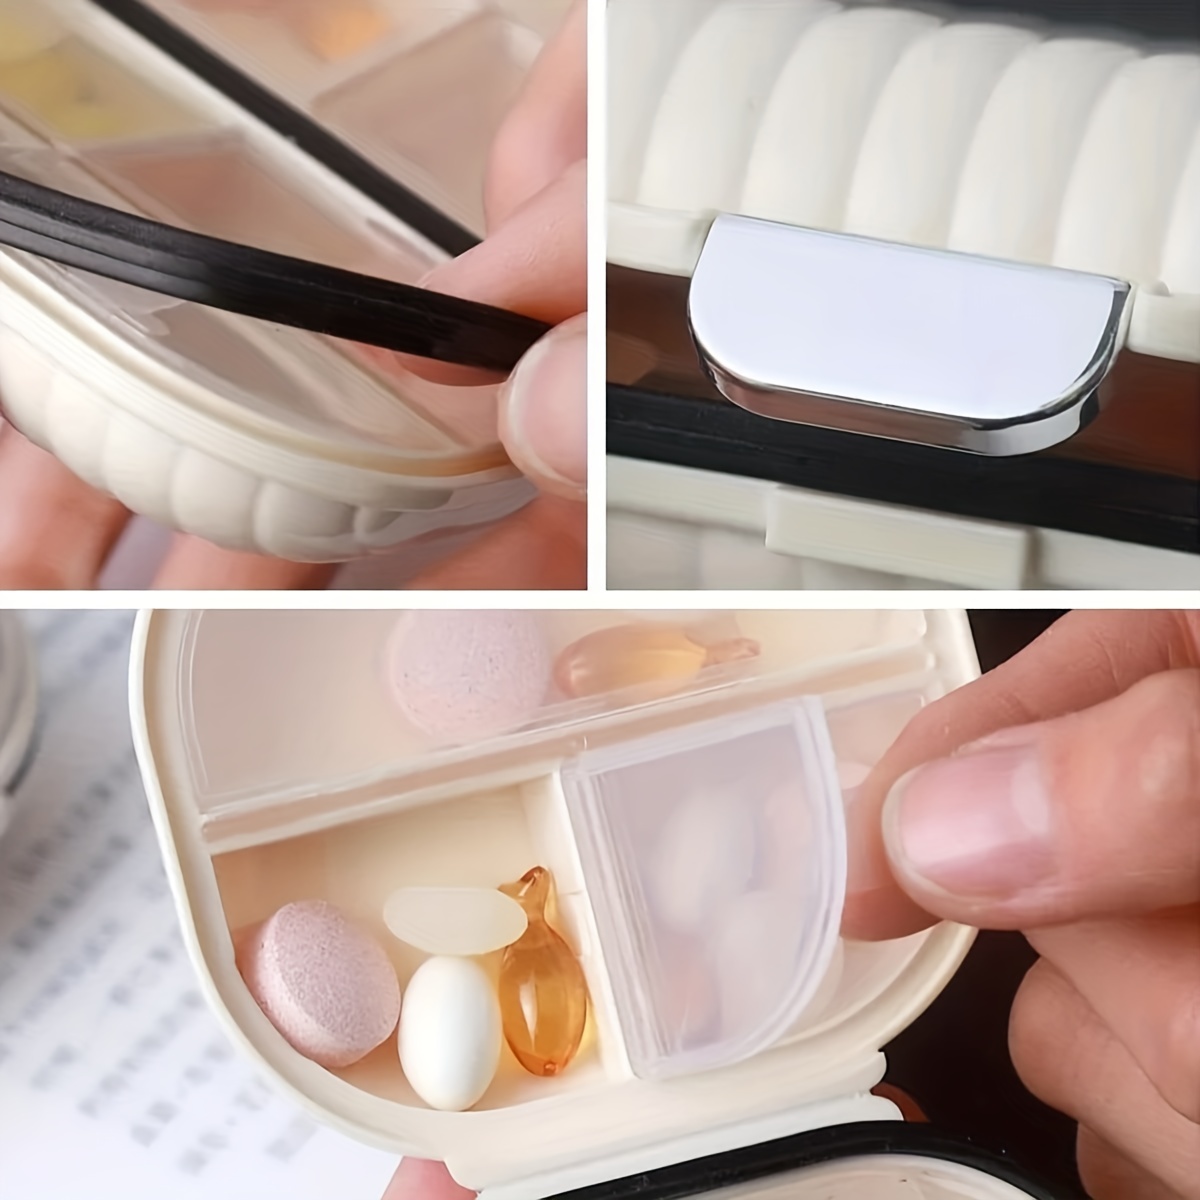 1pc Portable 4-Compartment Pill Organizer for Daily Medication